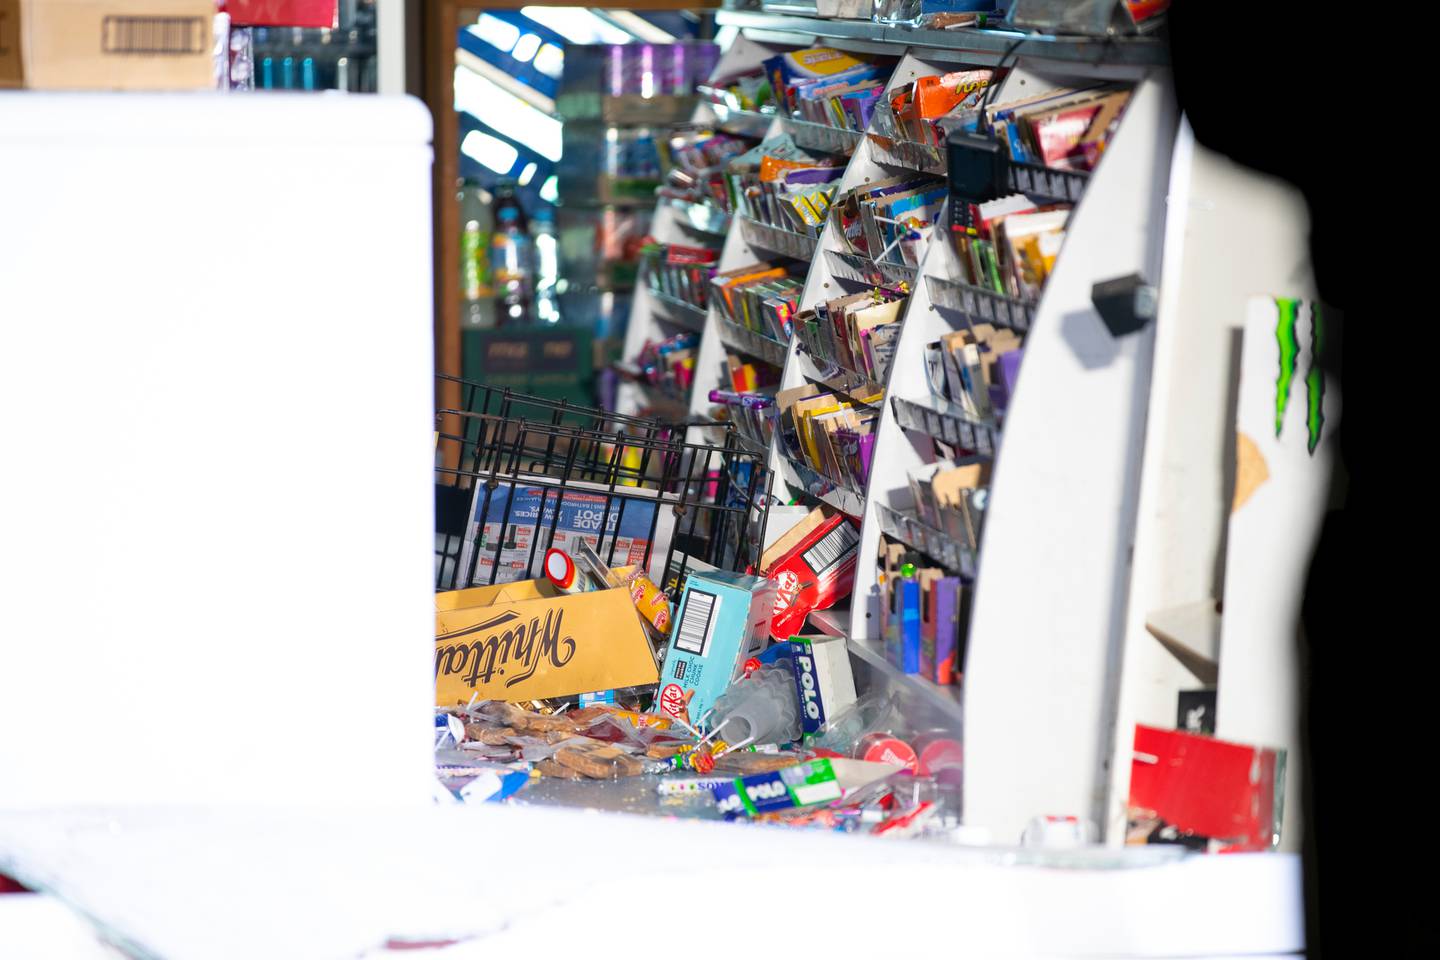 Lollies and chips were left strewn across the shop. Photo / Hayden Woodward